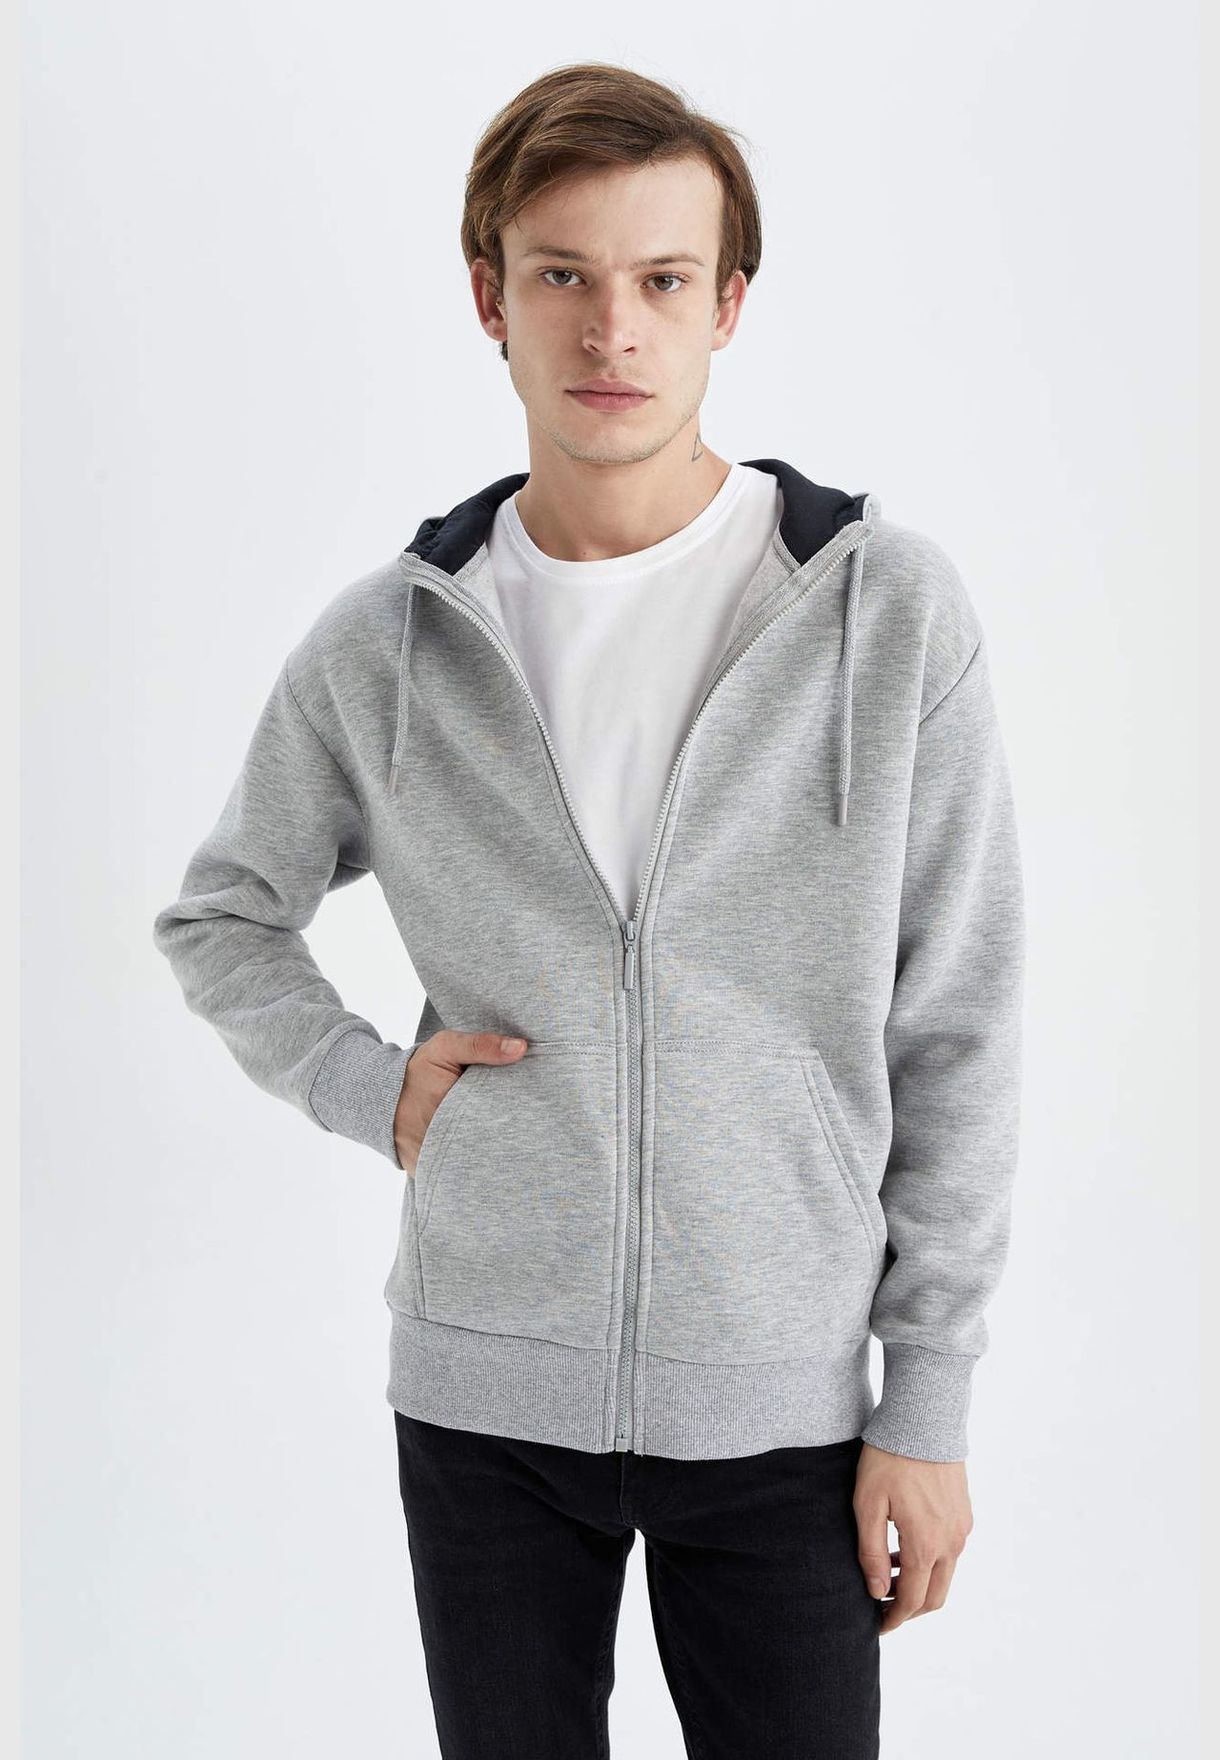 Man Regular Fit Hooded Long Sleeve Knitted Cardigan